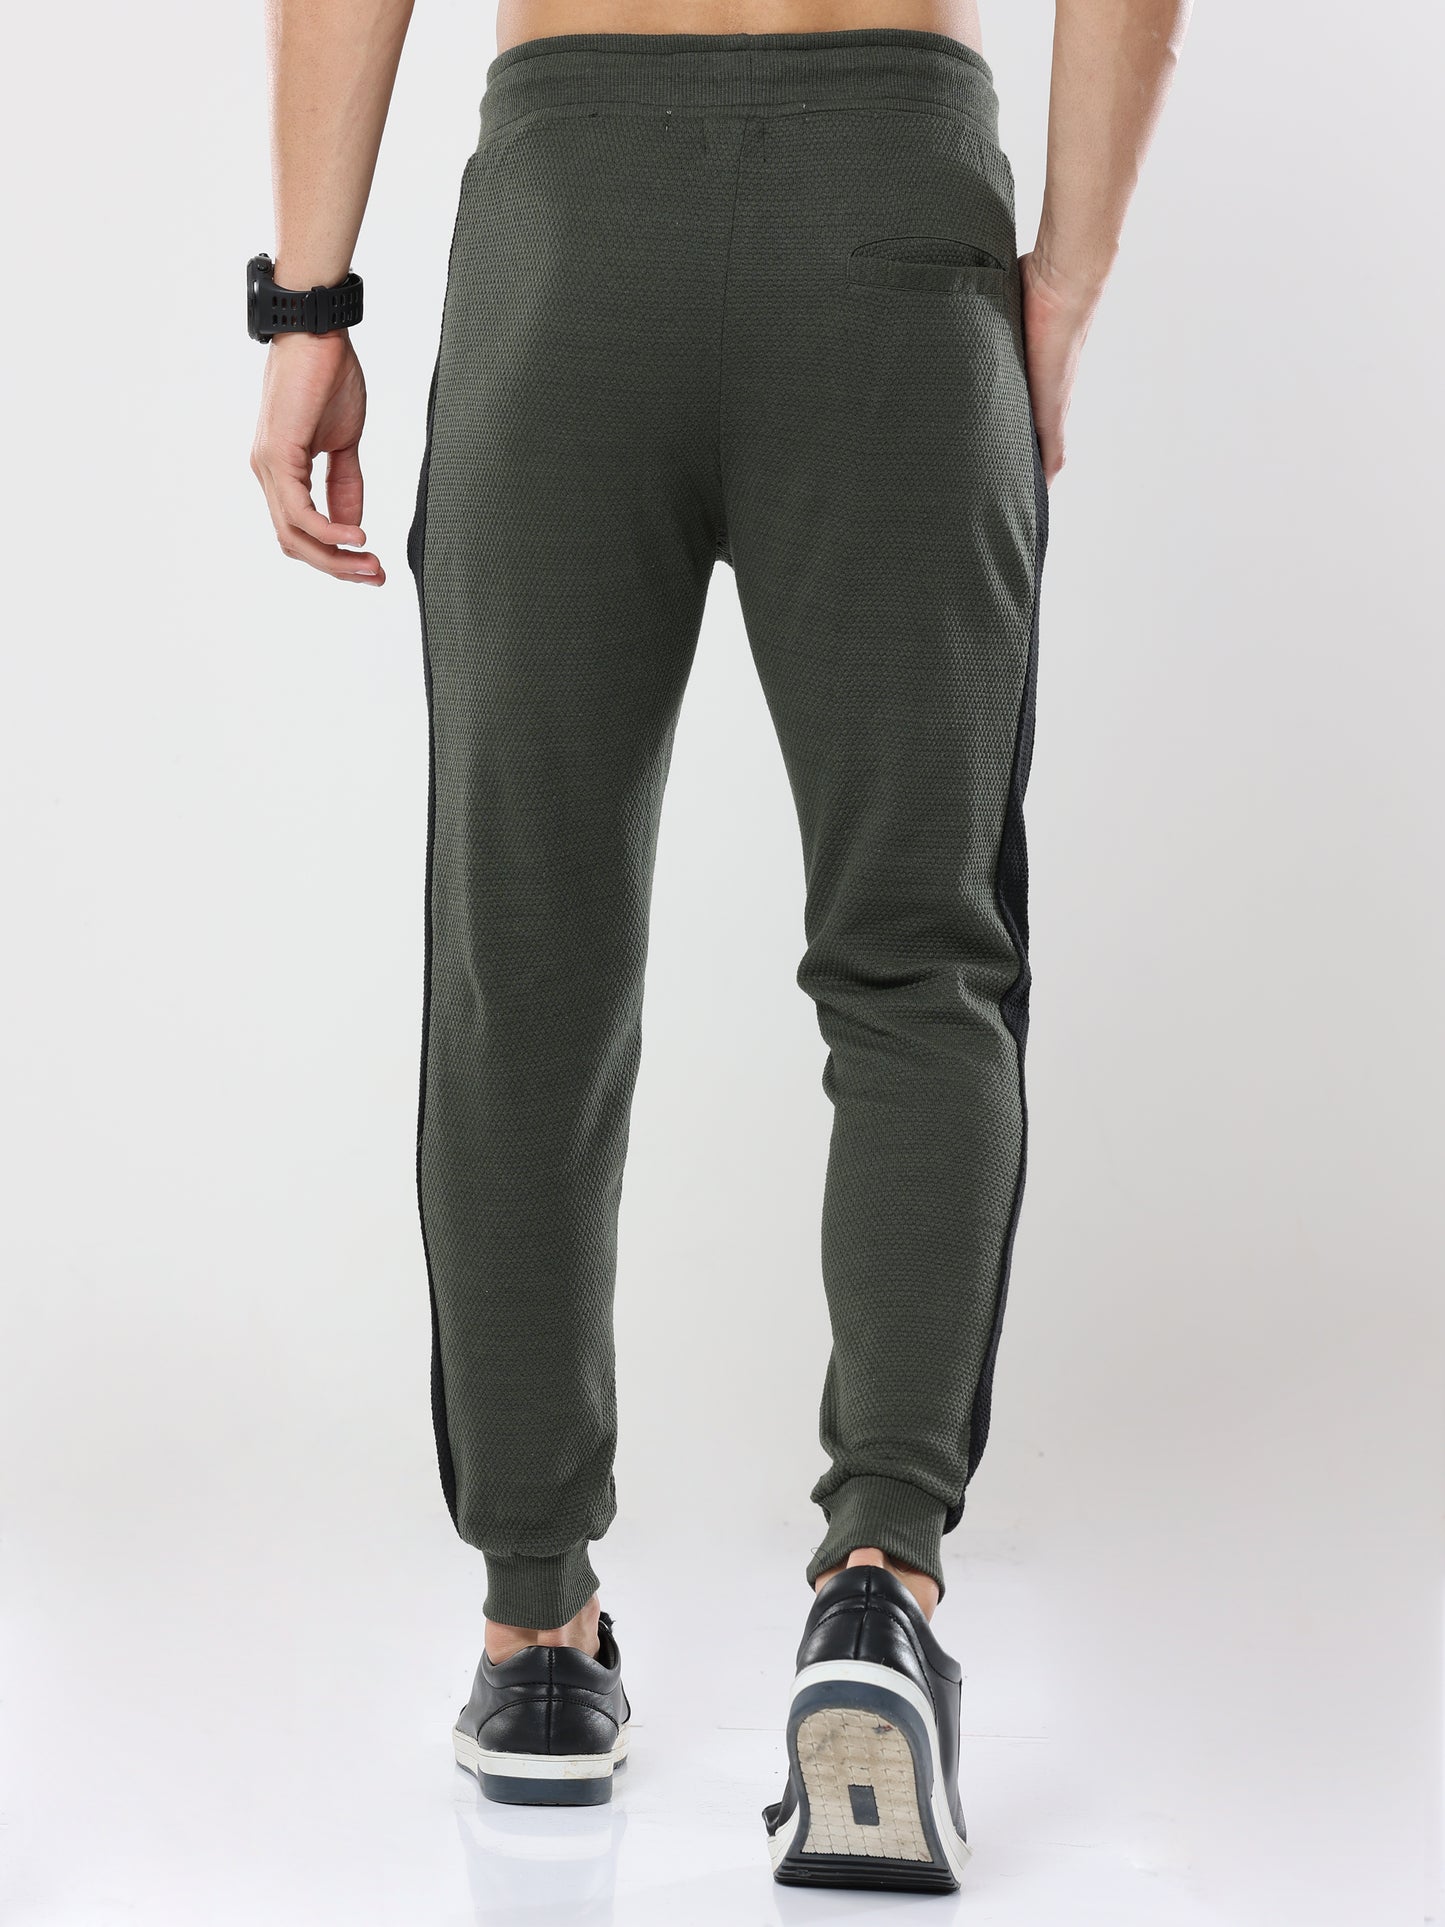 Bottle Green striped casual premium Popcorn Track Pant for mens